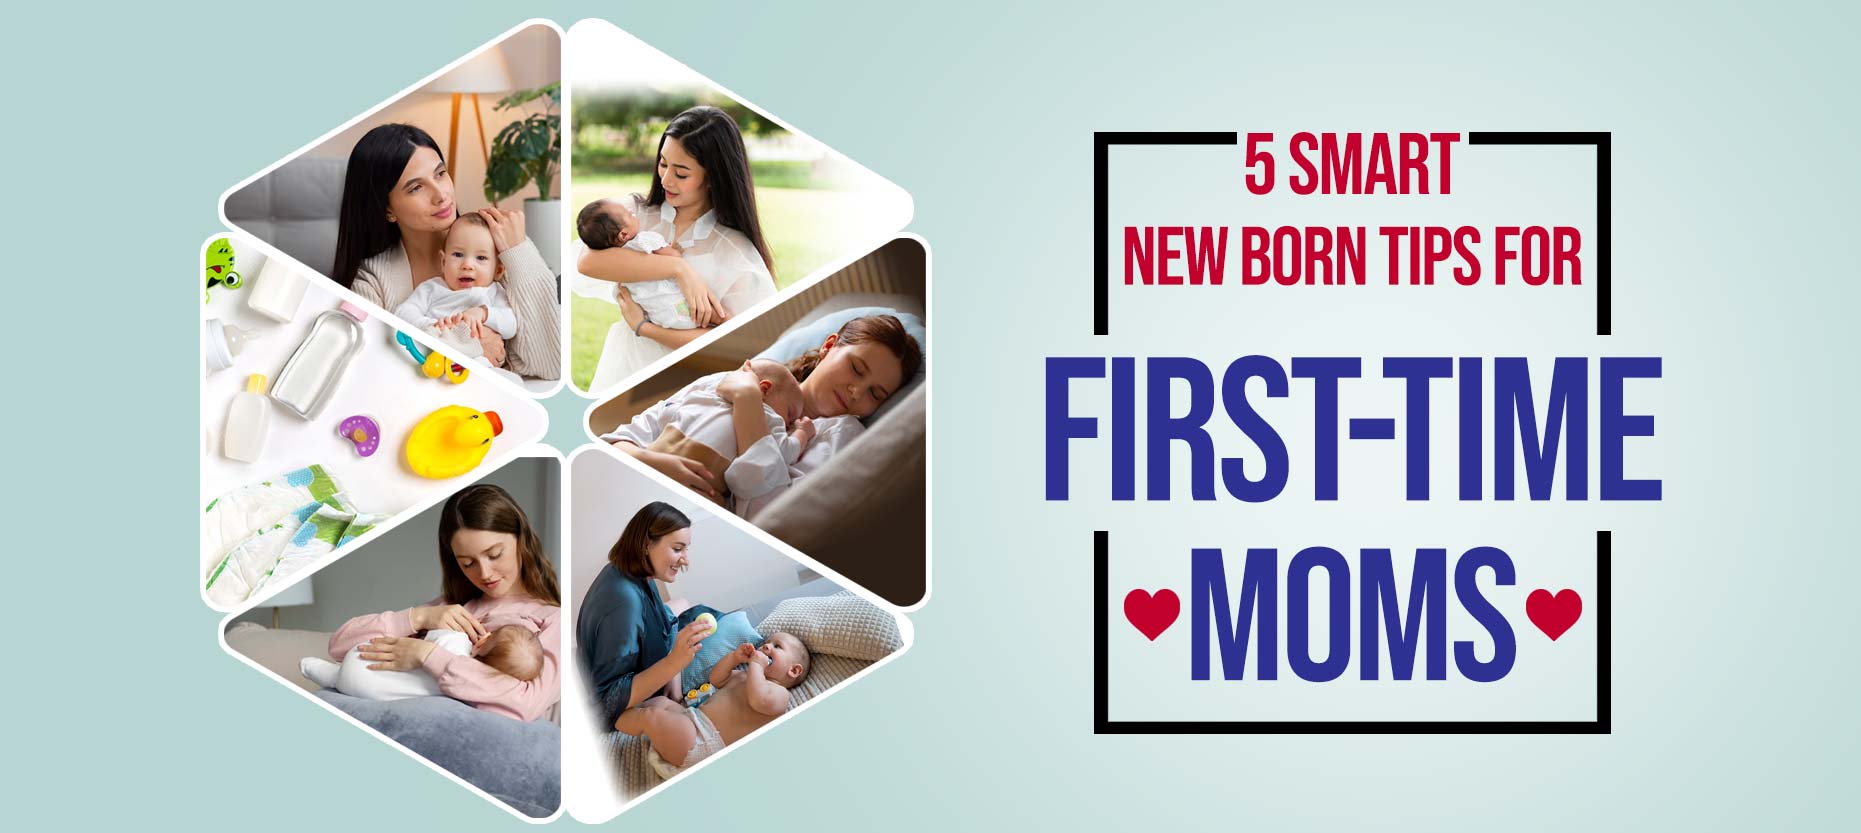 newborn tips for first time moms